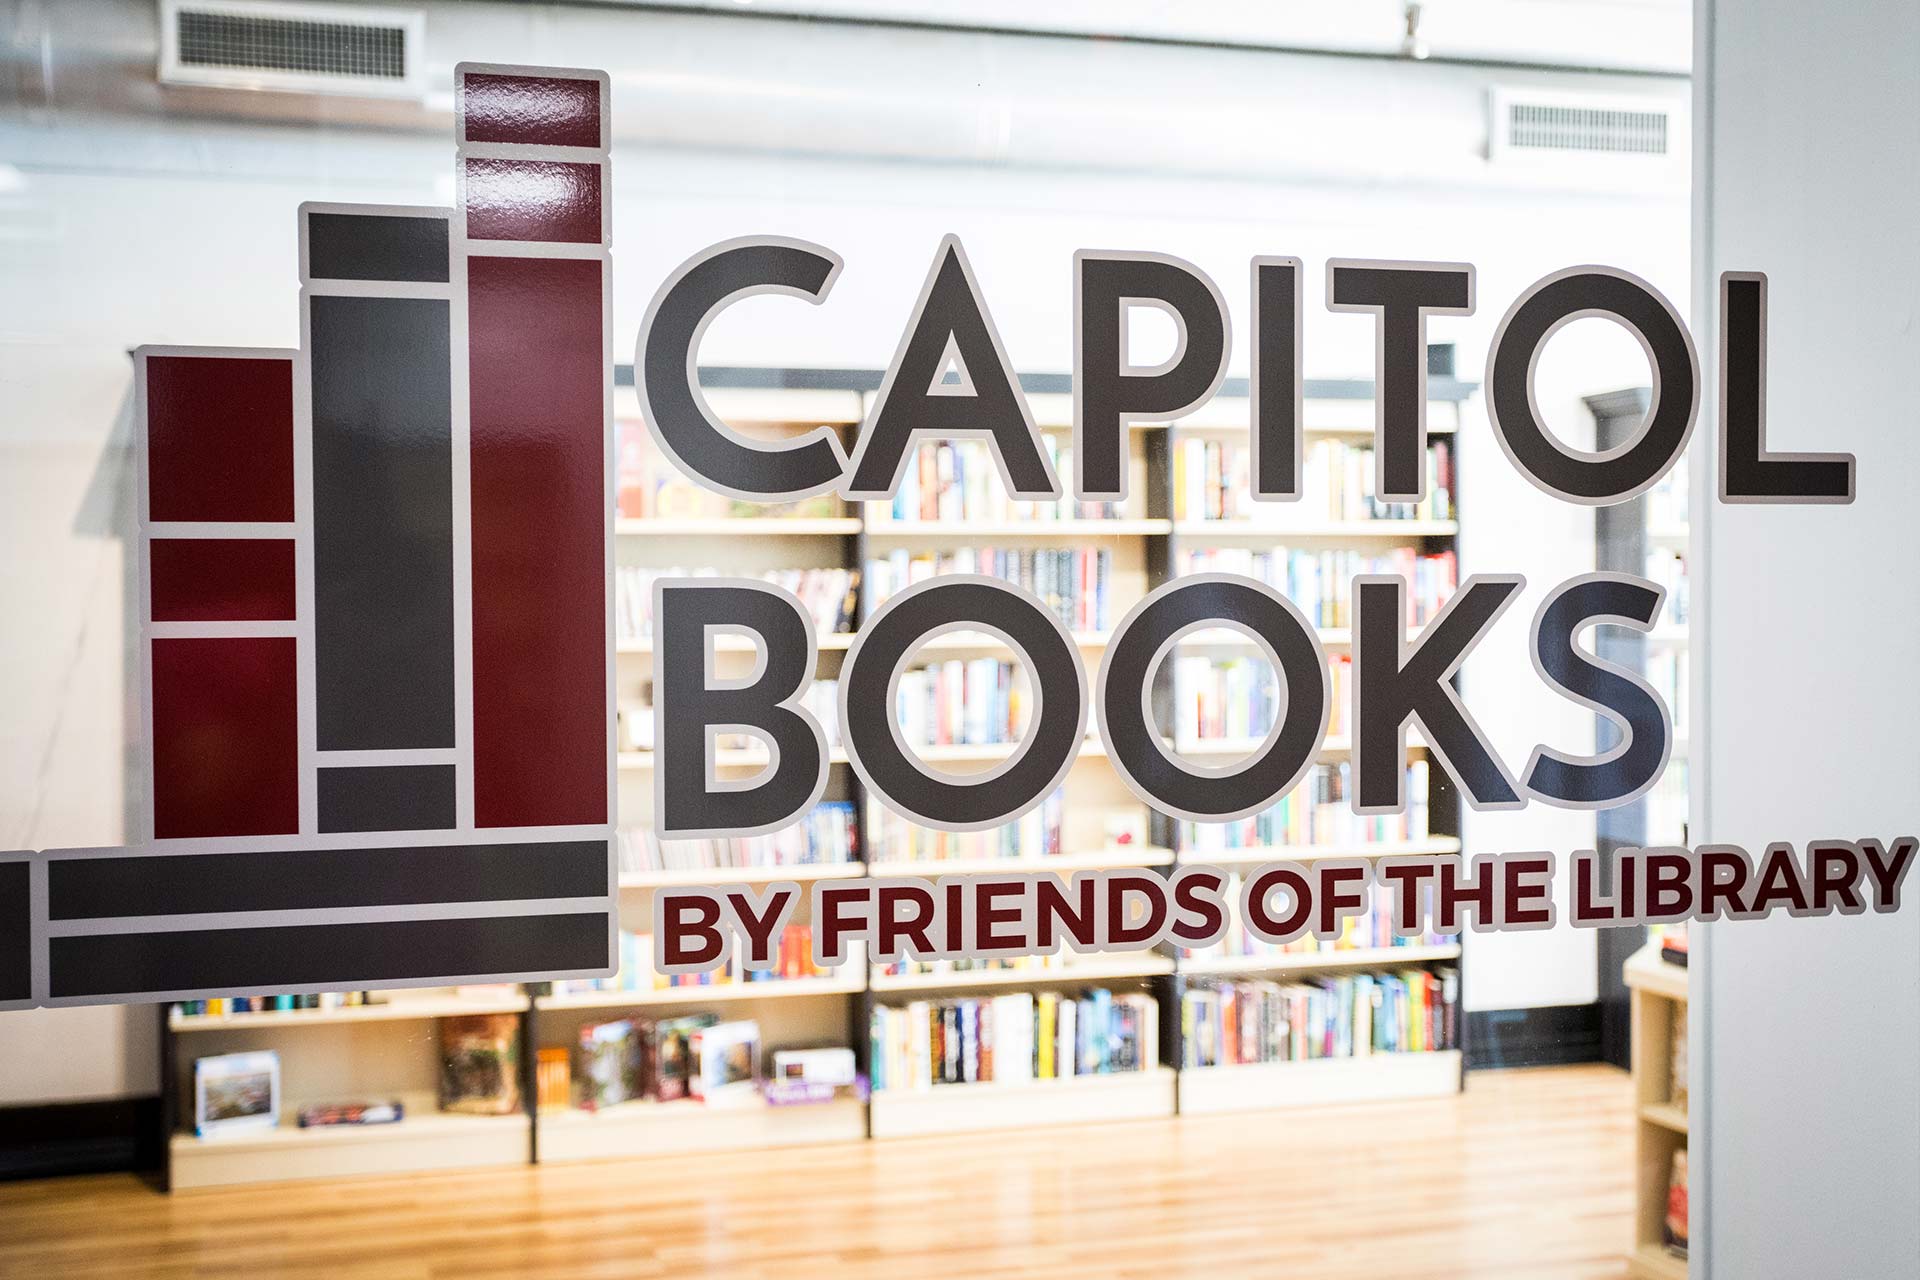 Capitol Books by Friends of the Library